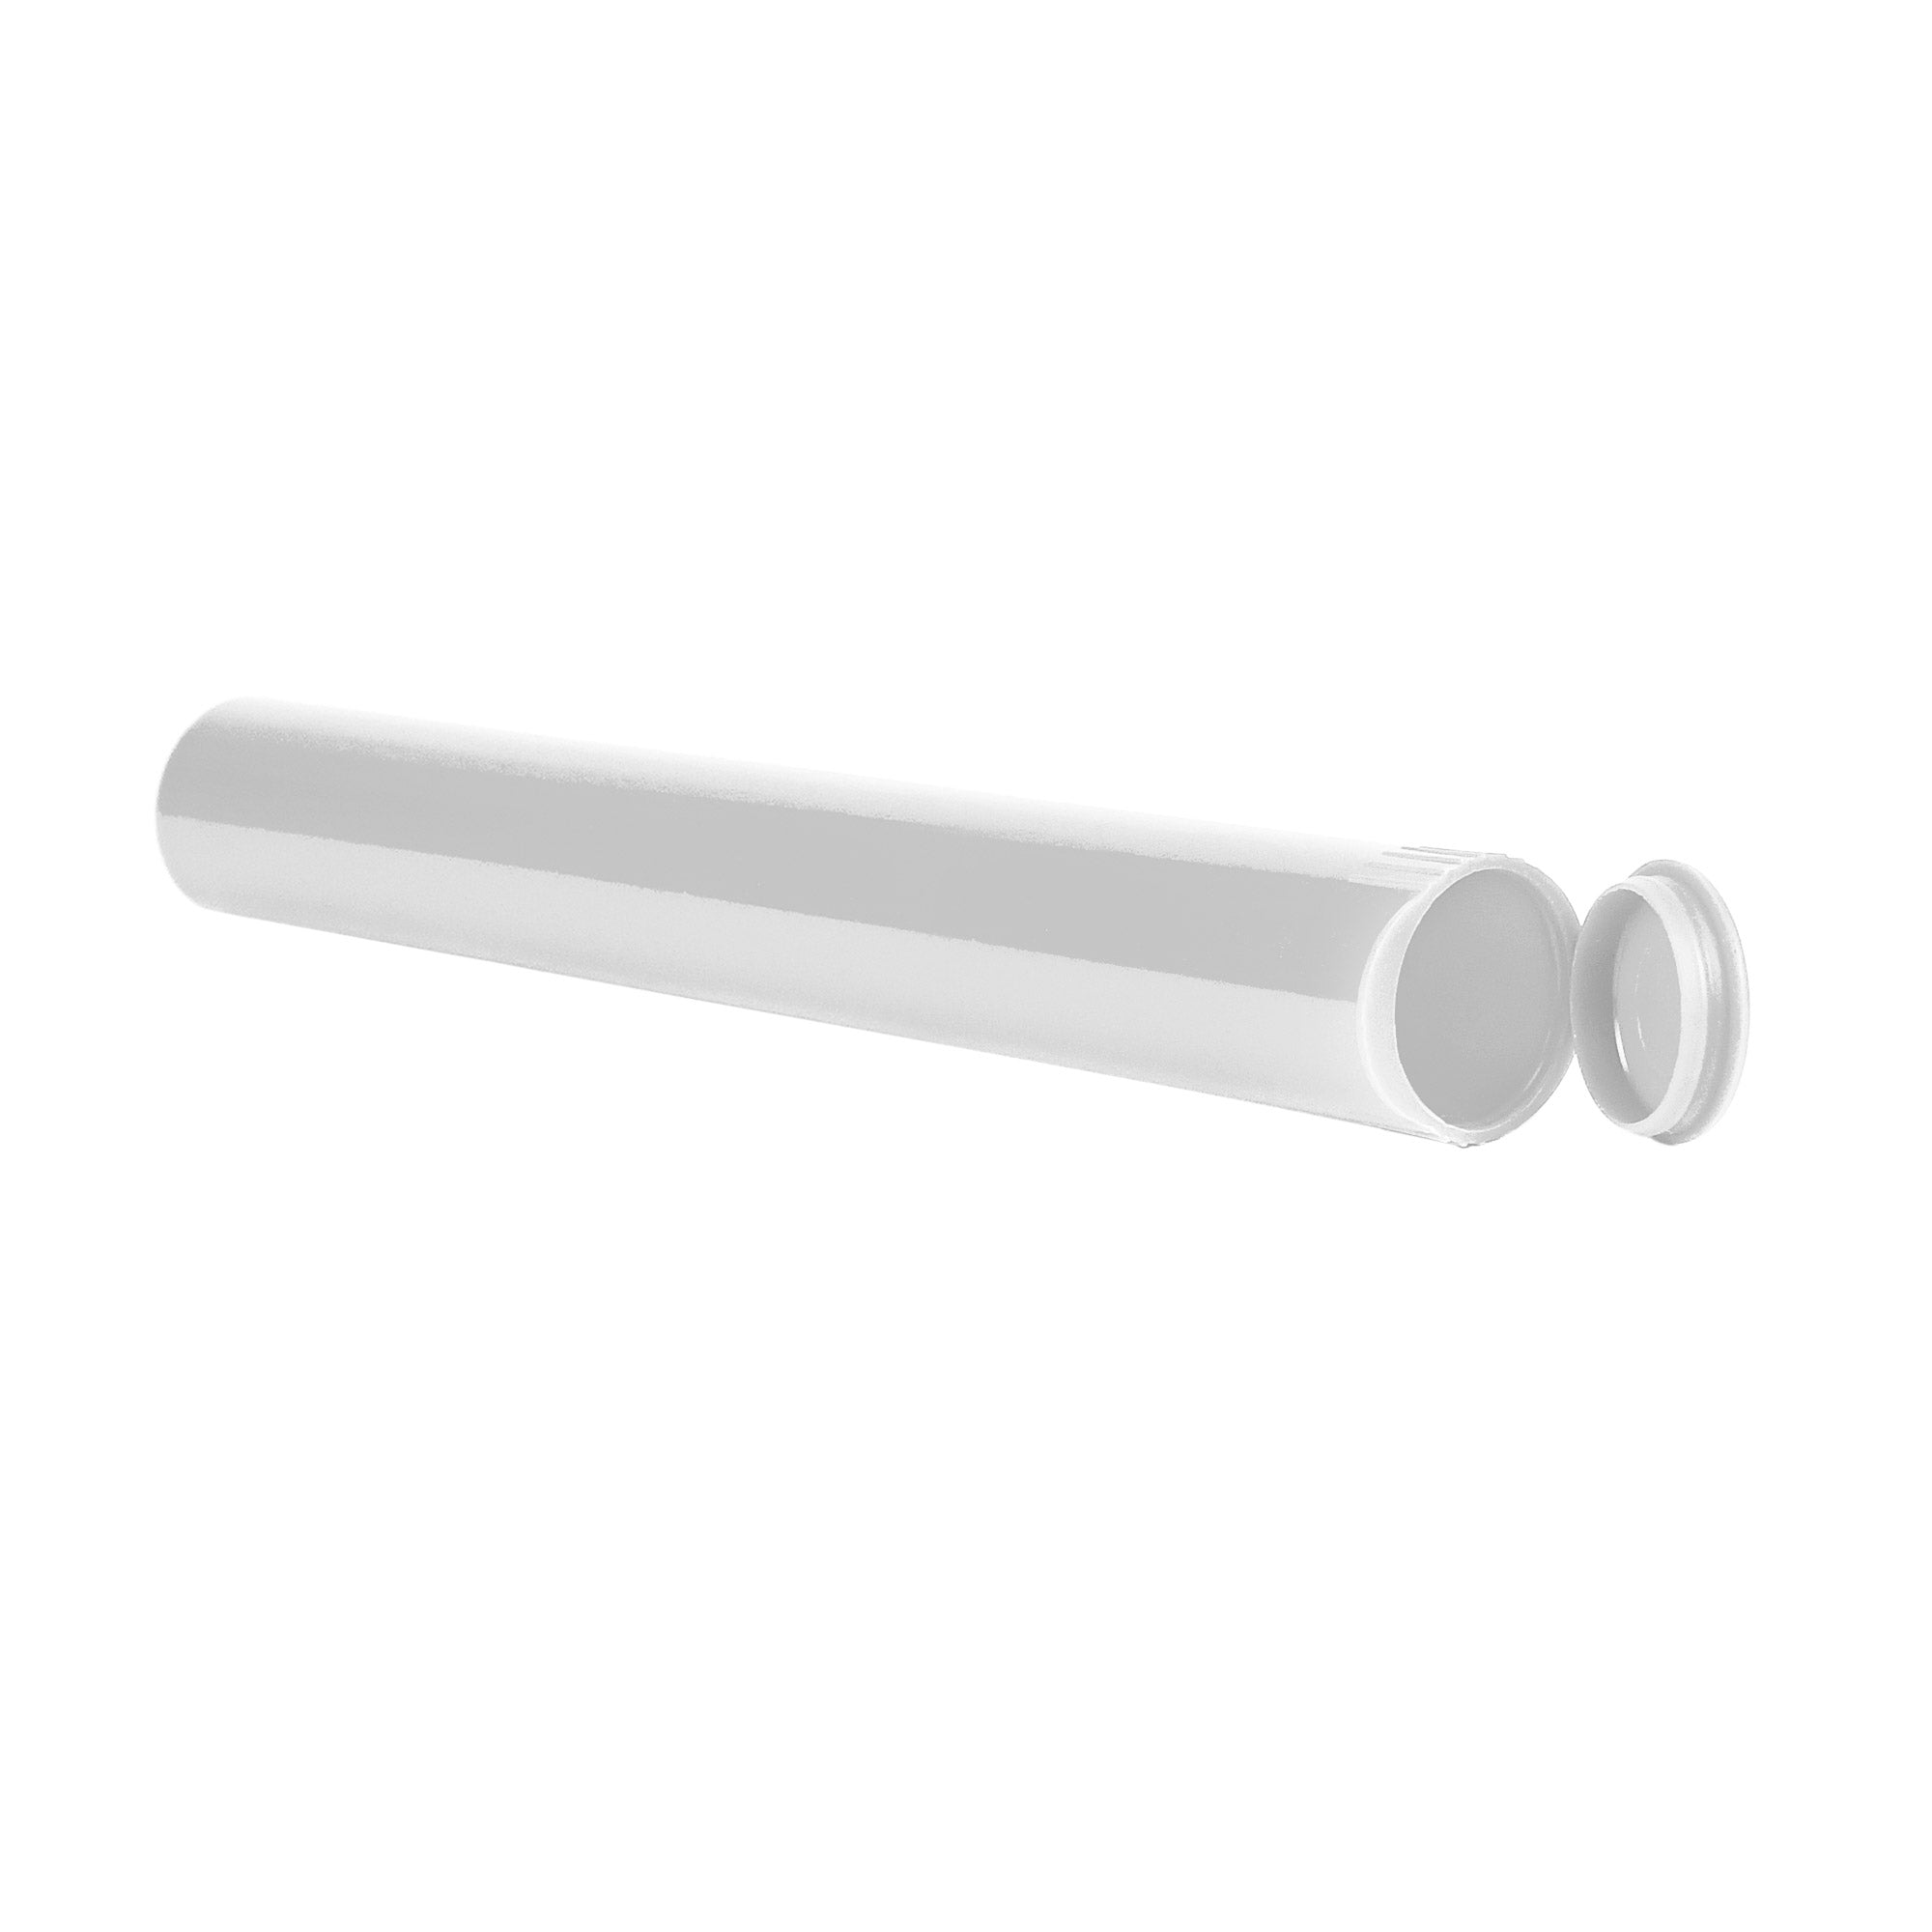 120mm Rx Squeeze Tubes Opaque White - 500 Count